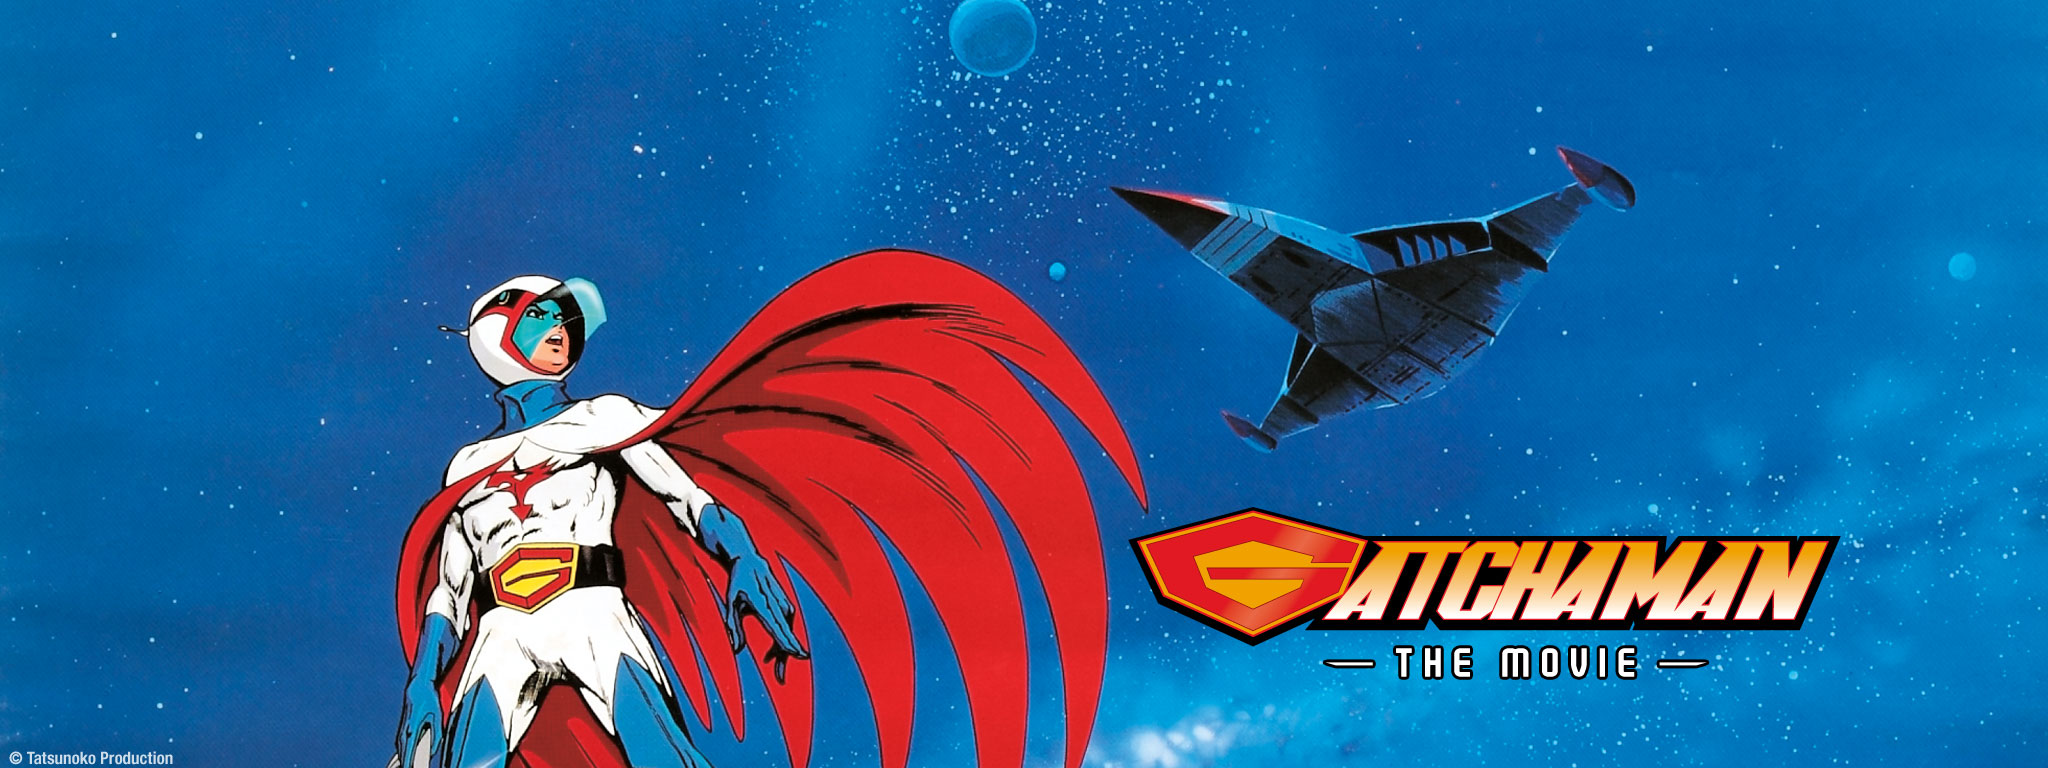 Title Art for Gatchaman the Movie